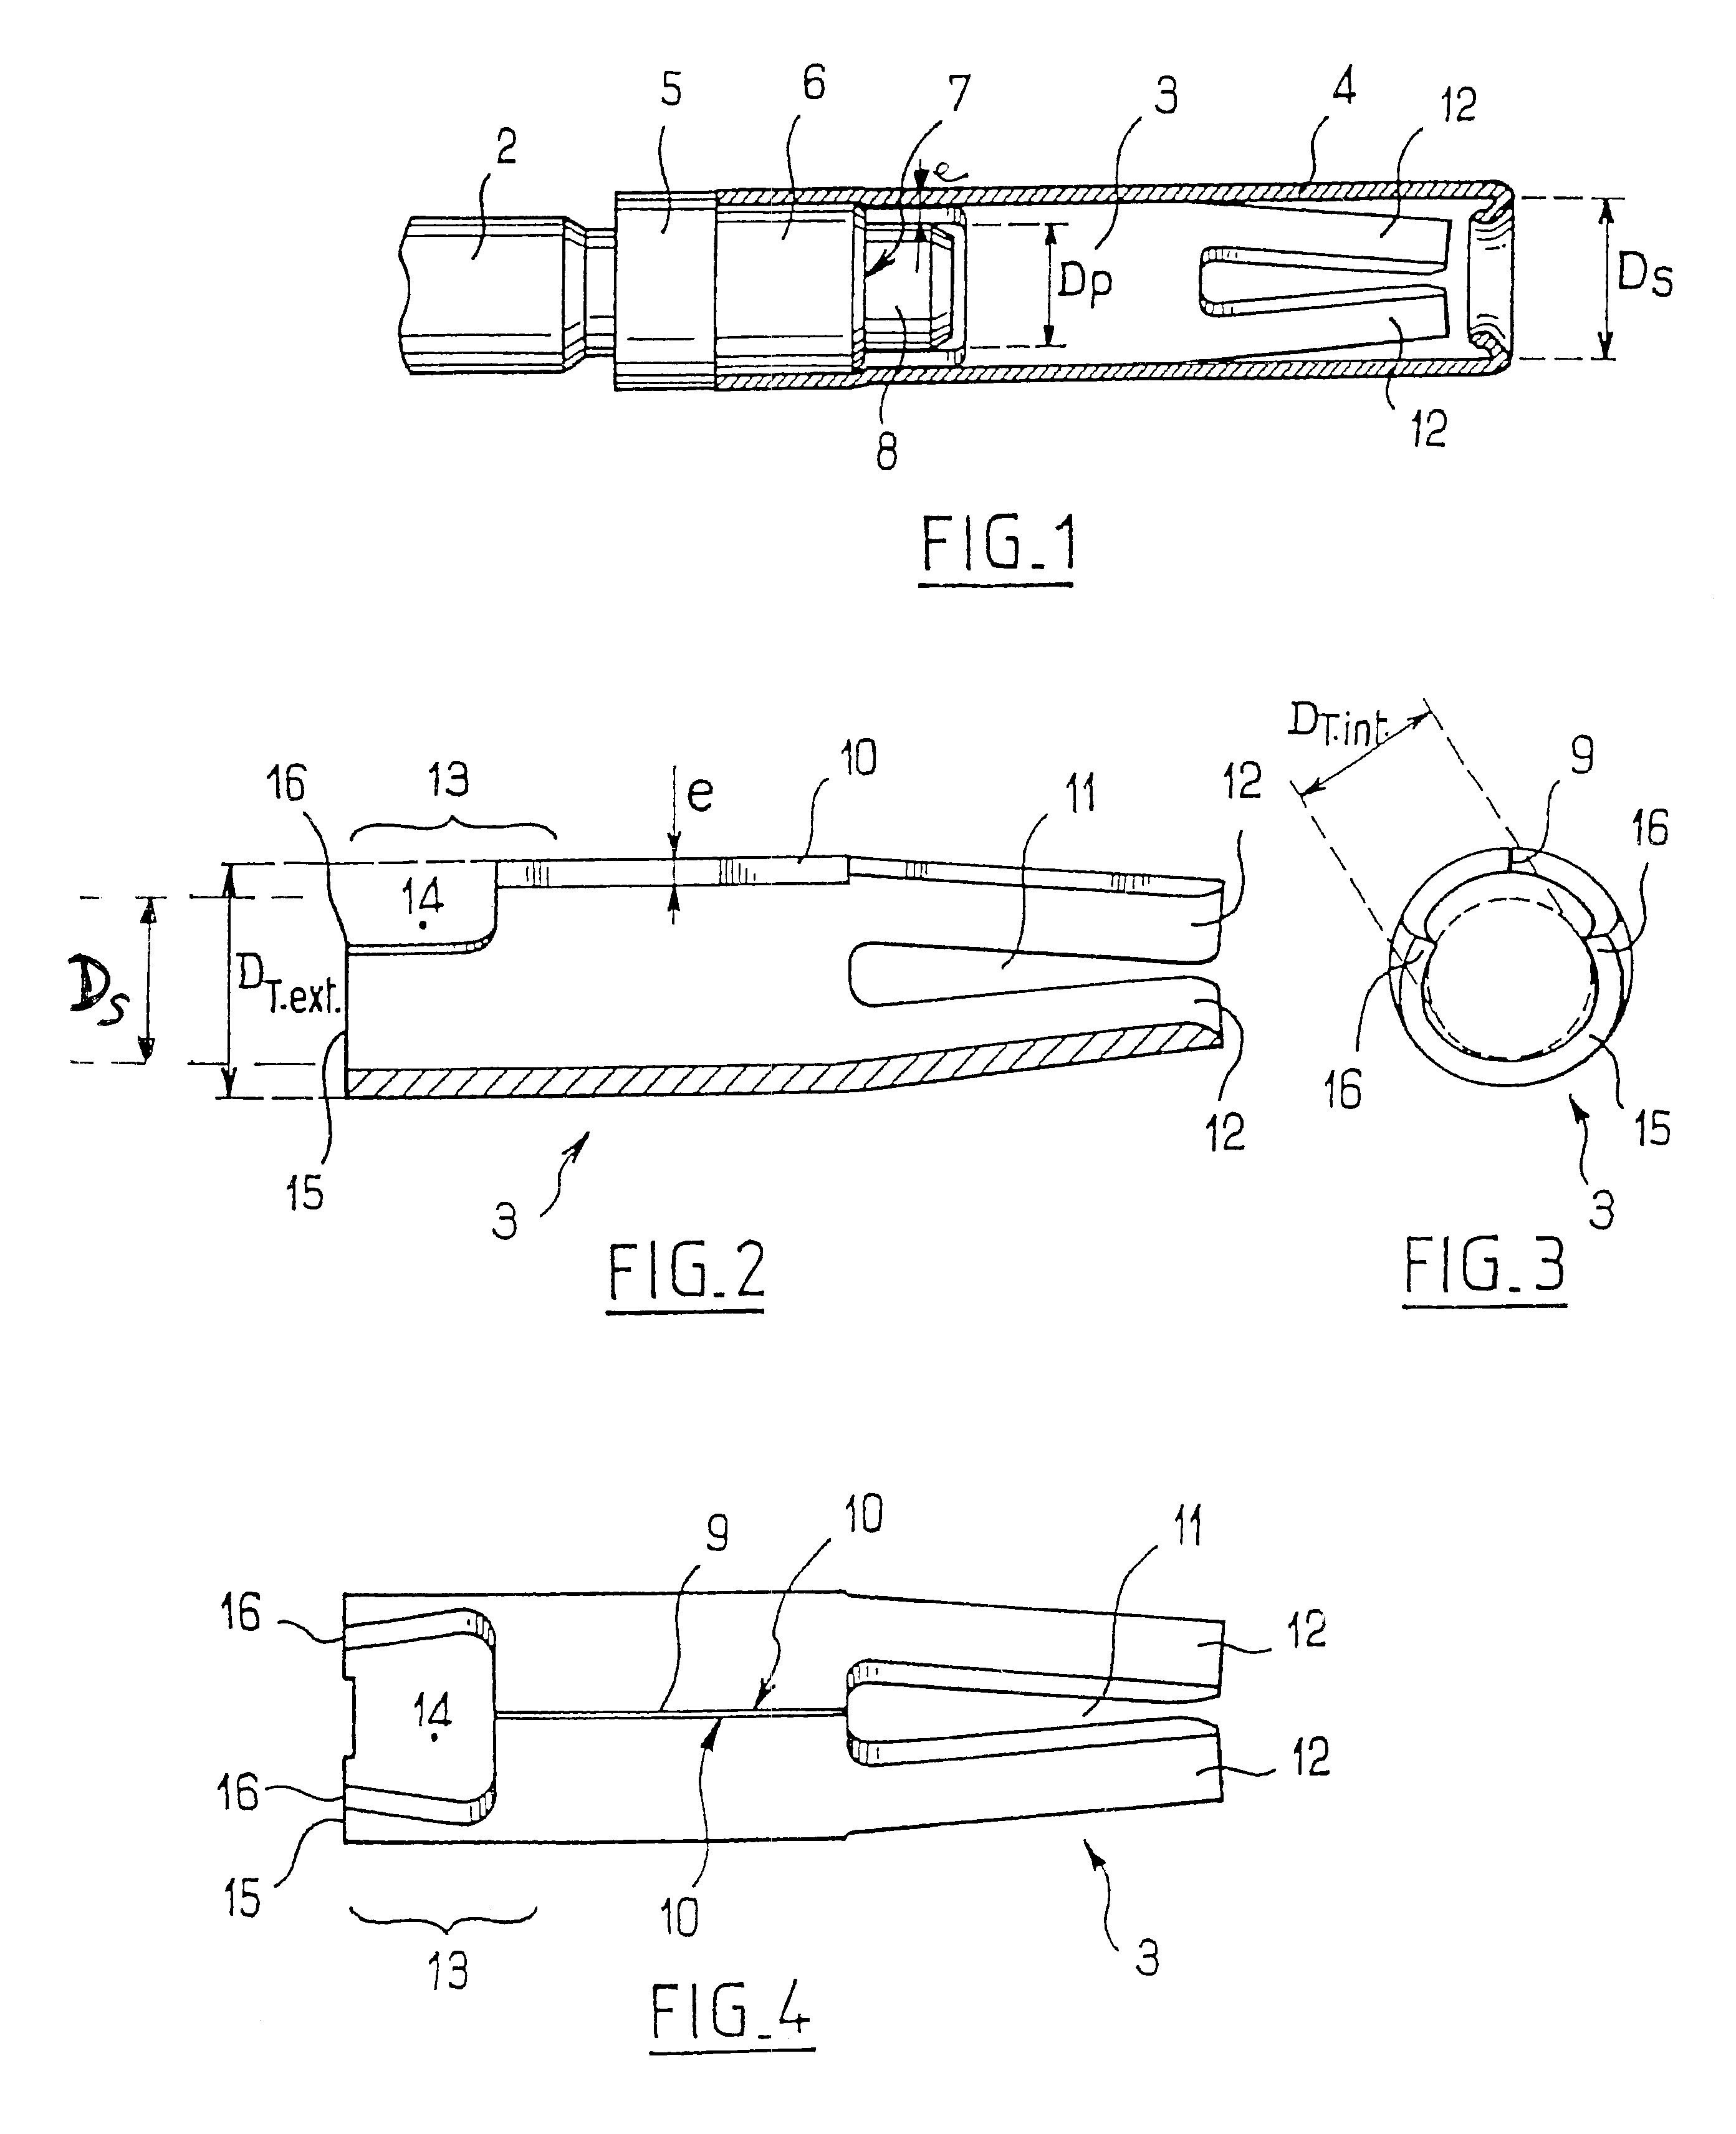 Electrical connector contact pin